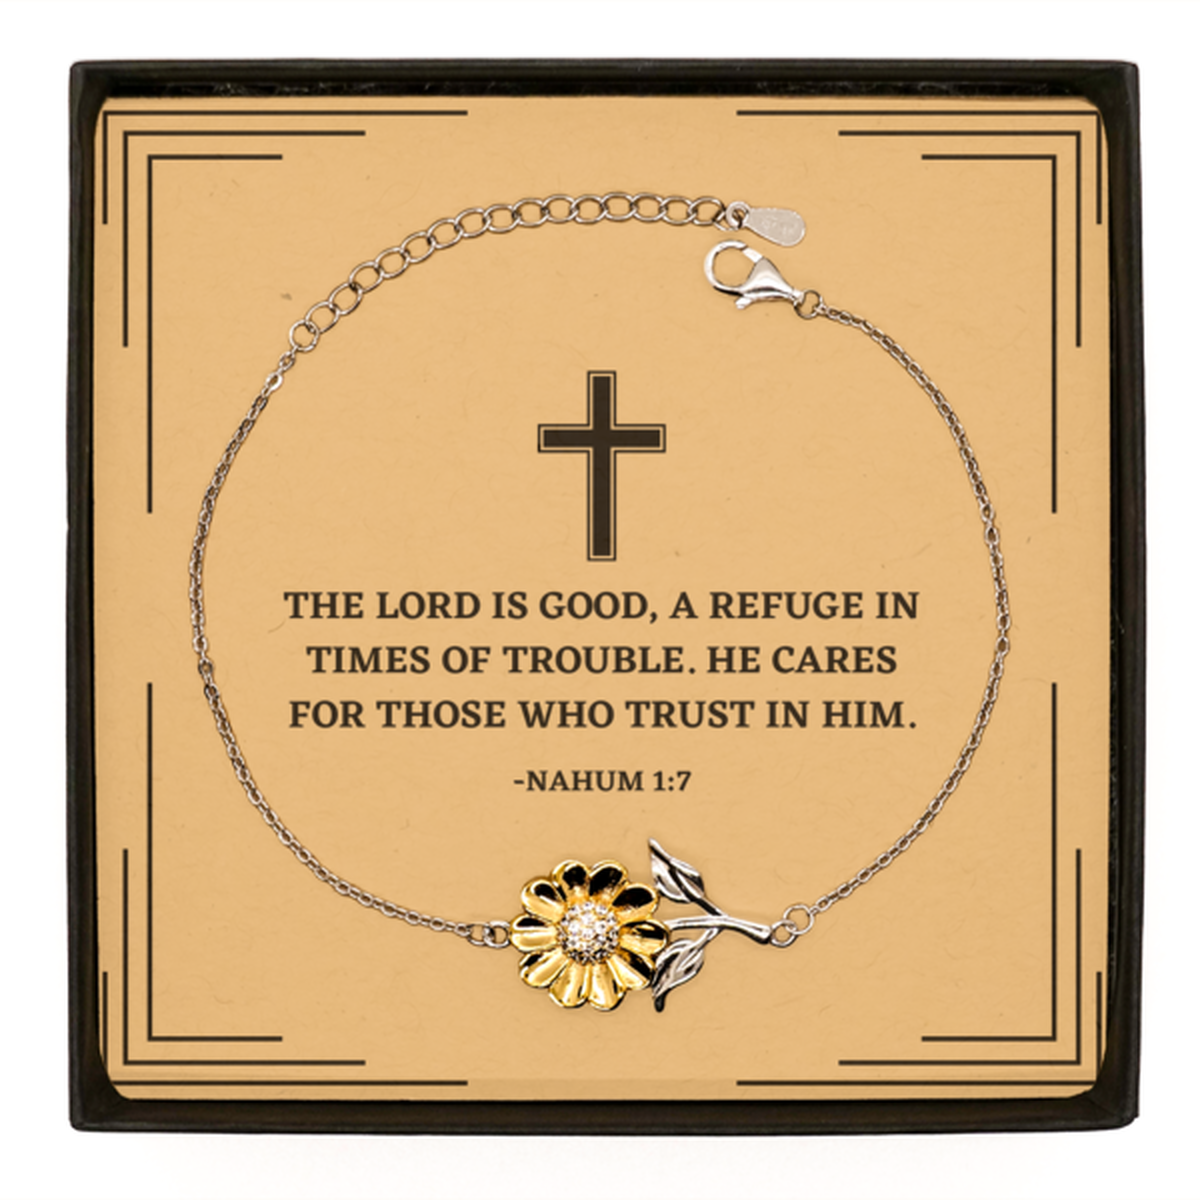 Baptism Gifts For Teenage Boys Girls, Christian Bible Verse Sterling Silver Sunflower Bracelet, The Lord is good, Confirmation Gifts, Bible Verse Card for Son, Godson, Grandson